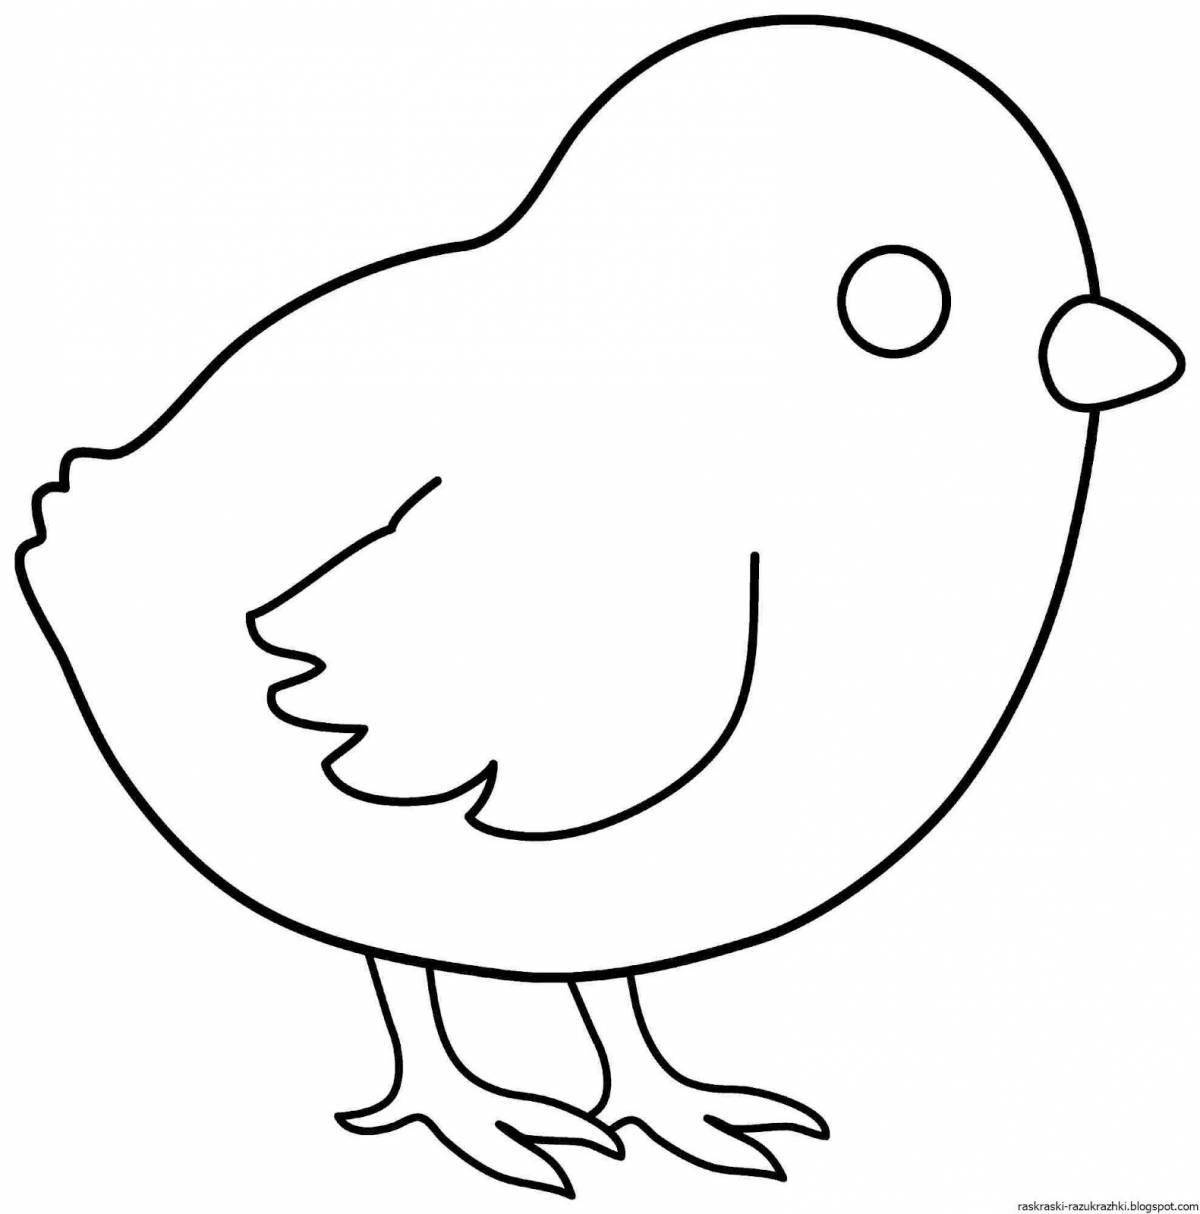 Great poultry coloring page for little students